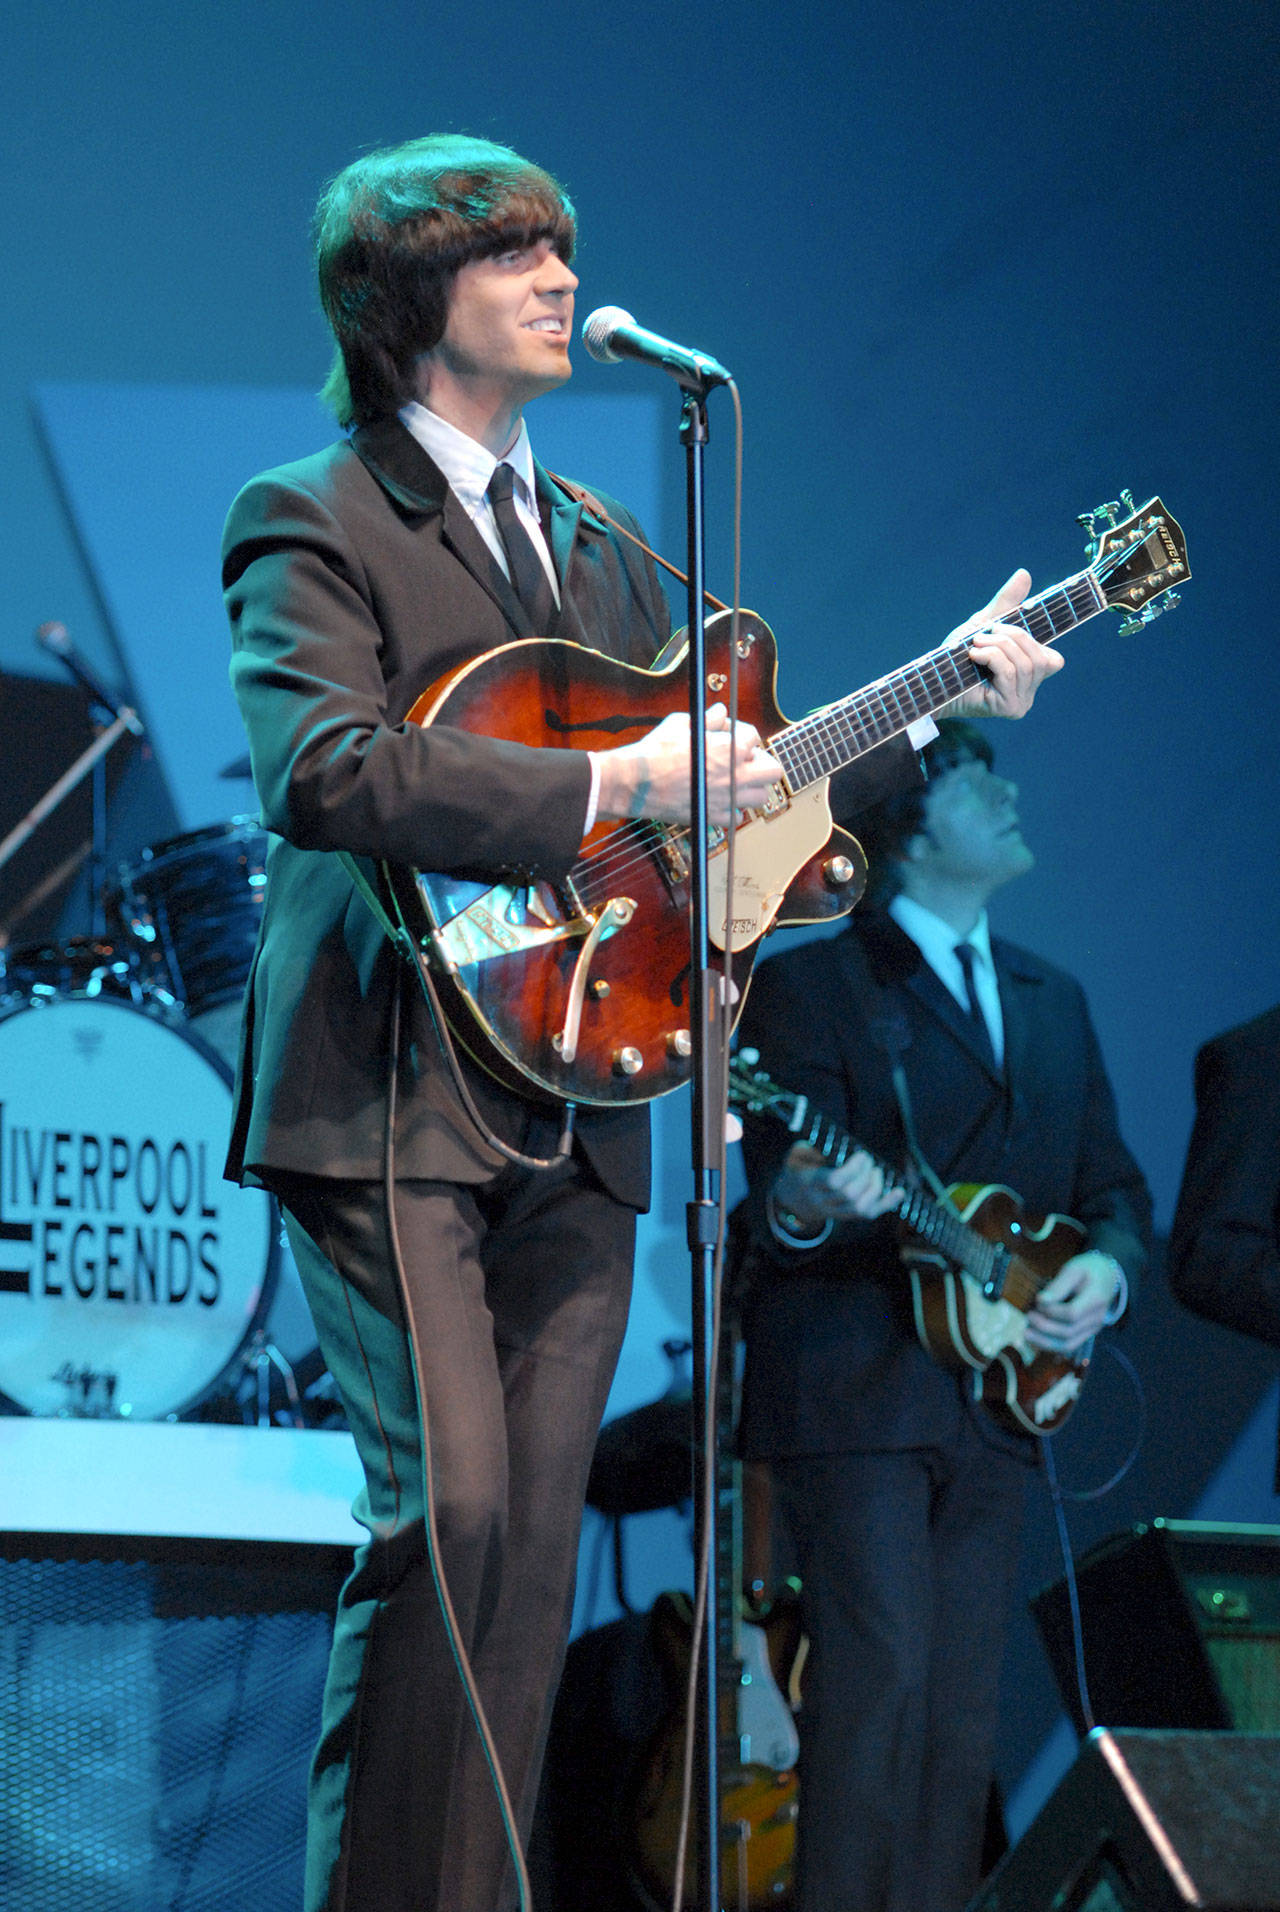 Marty Scott, a Chicago native, portrays the late George Harrison in Liverpool Legends. (Liverpool Legends)